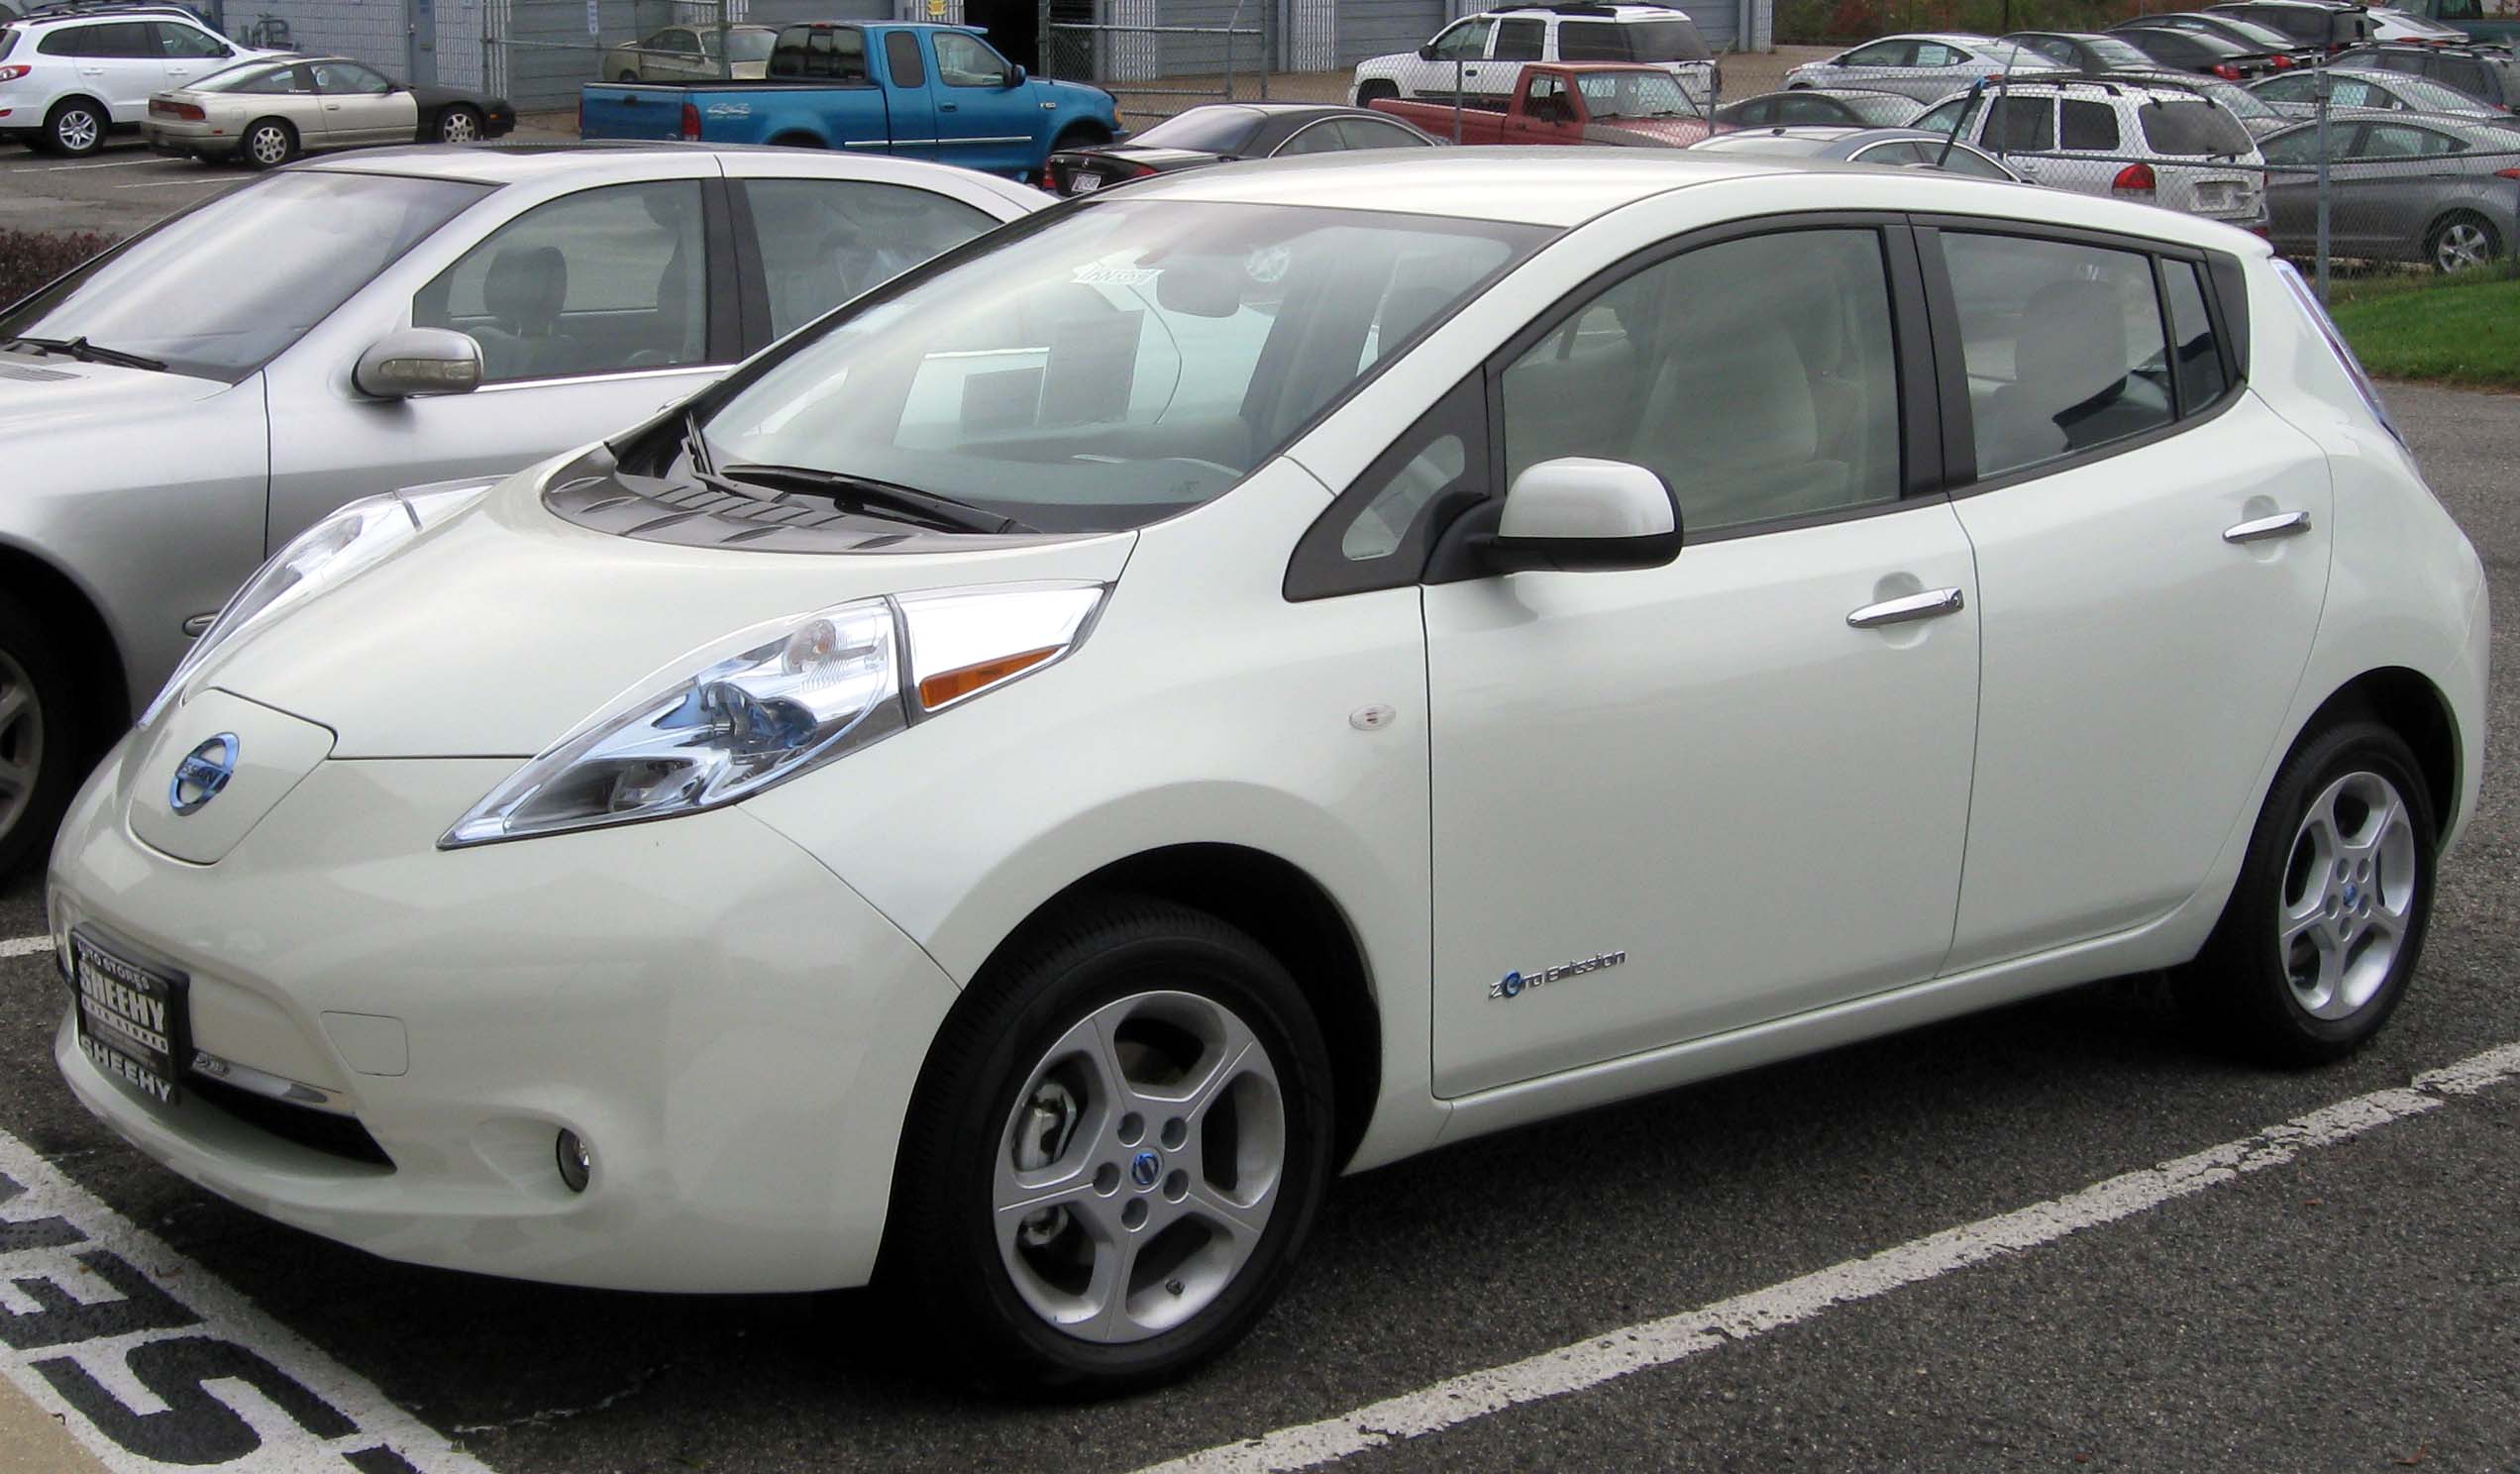 Nissan Leaf Photo and Wallpaper